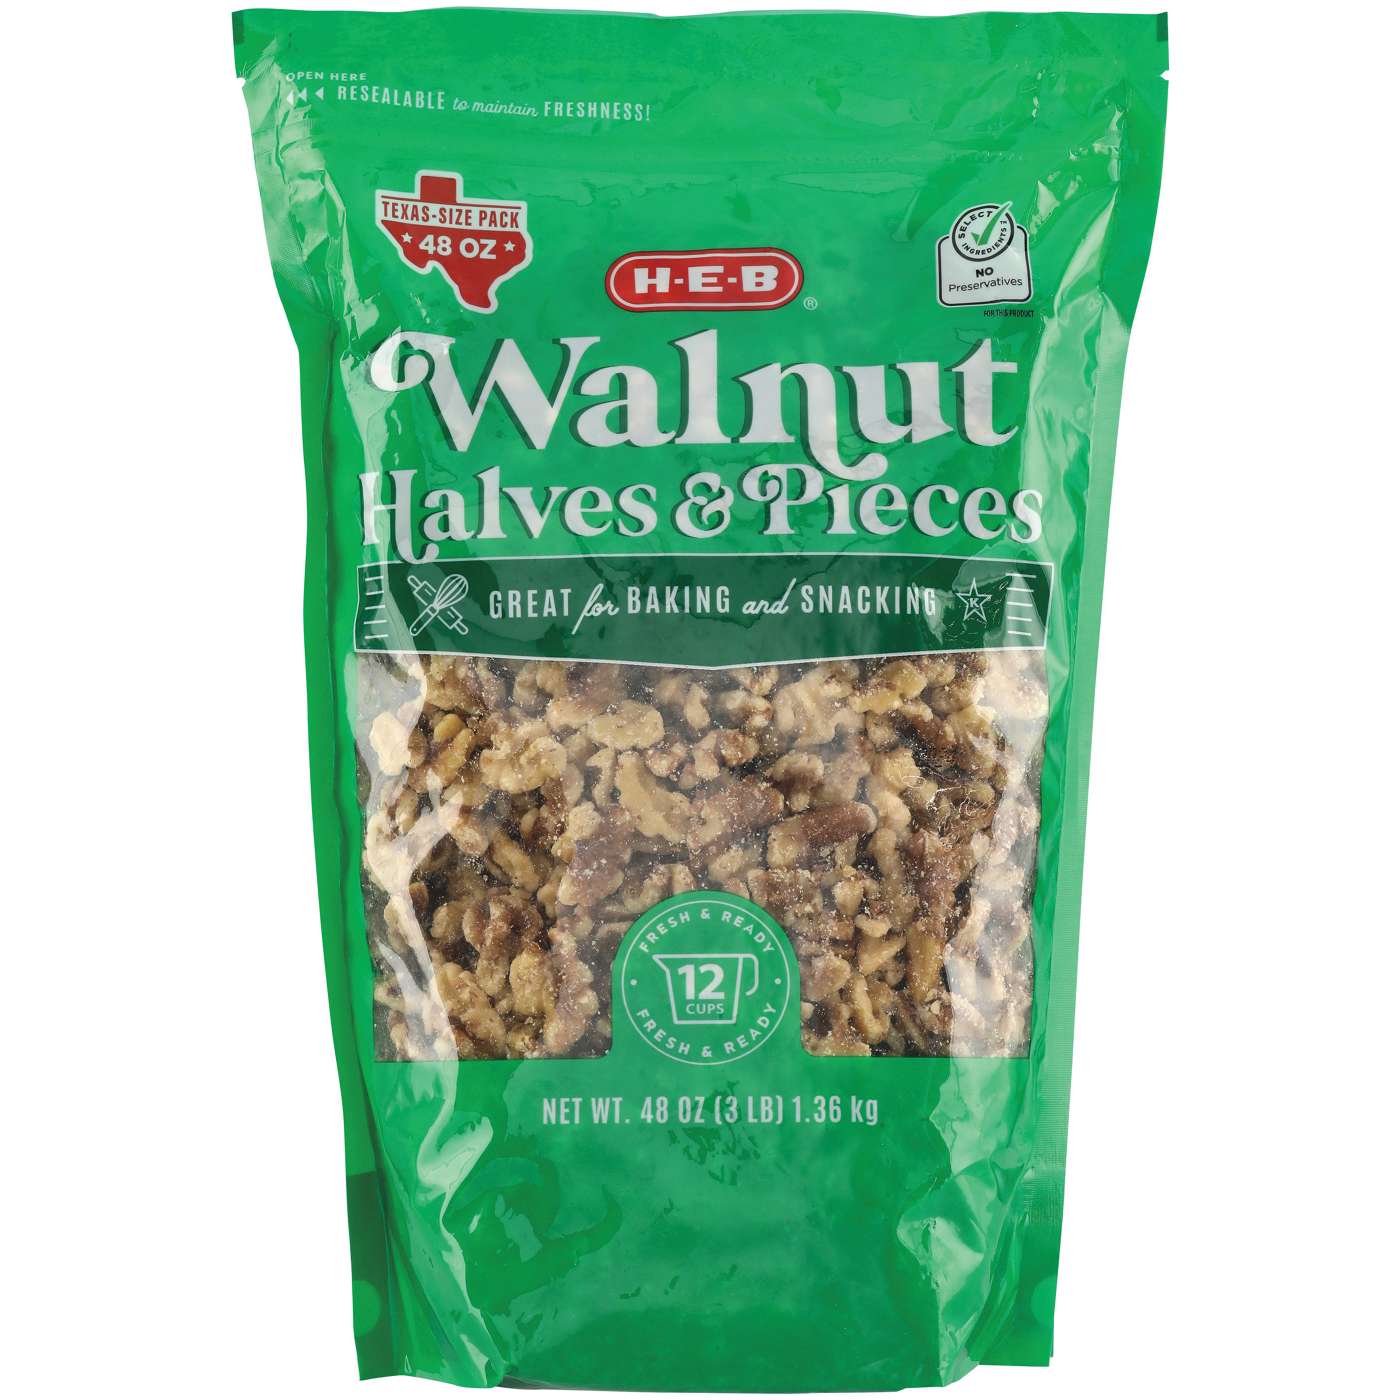 H-E-B Walnut Halves & Pieces - Texas-Size Pack; image 2 of 2